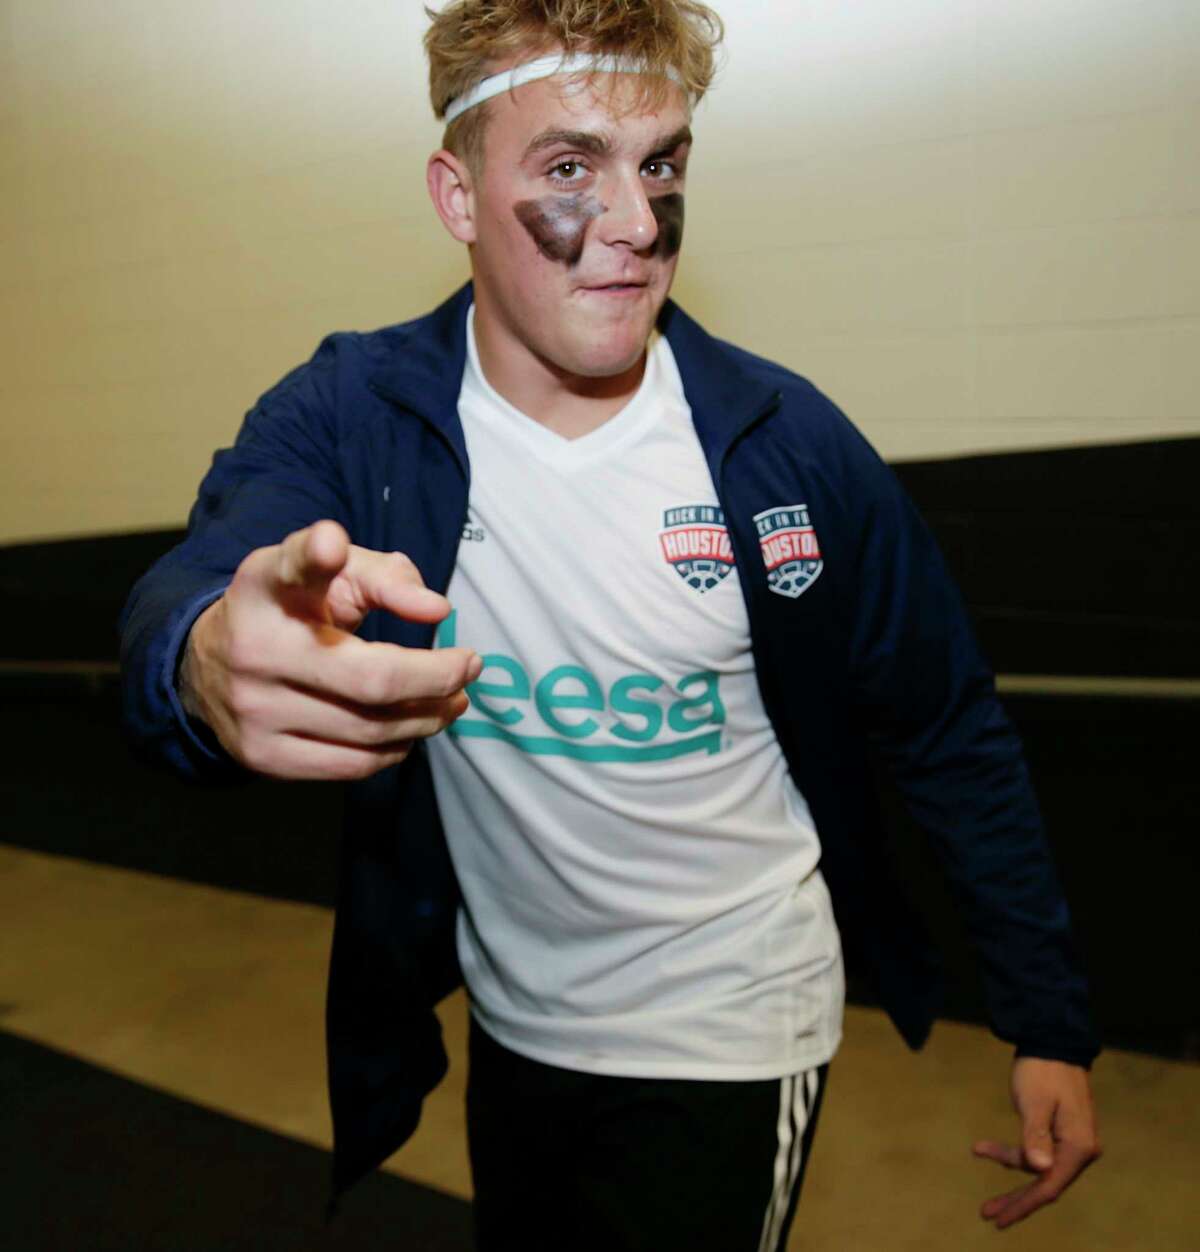 Controversial Youtuber Jake Paul caused a frenzy when he visited San Antonio in August to rally support for Hurricane Harvey survivors. Now, Paul is returning with his crew of semi-famous internet celeb friends in tow for his Team 10 Tour. Eventgoers can expect an evening of live musical performances, audience participation, special guests, games and challenges. 8 p.m. Friday. Aztec Theatre, 104 N. St. Mary’s St. $52-$60.50, theaztectheatre.com   -- Polly Anna Rocha